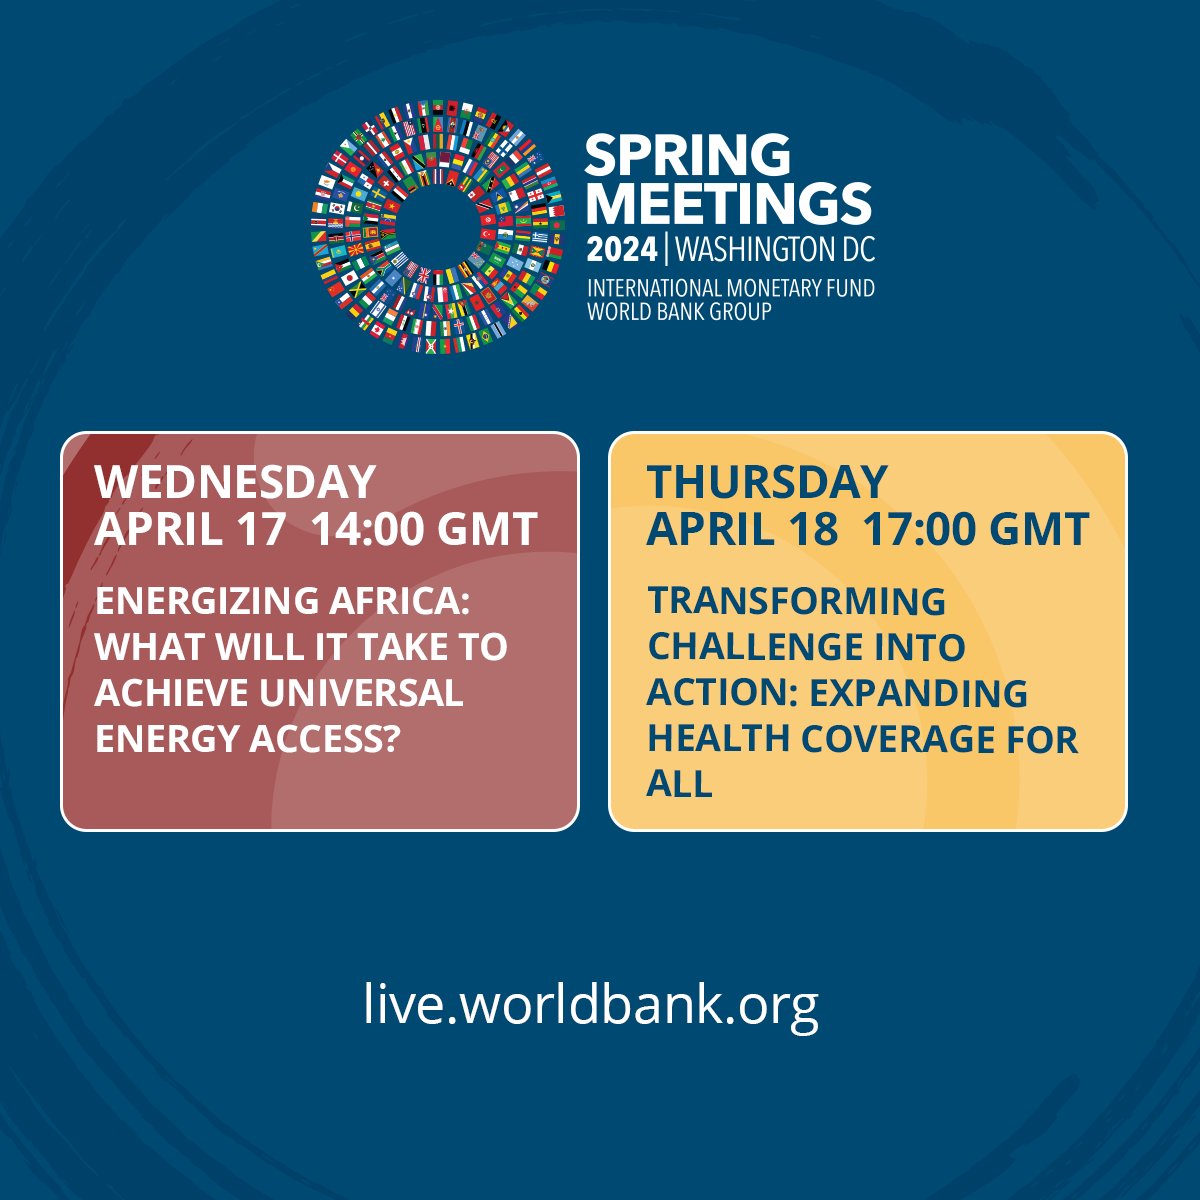 Tune in to our #WBGMeetings to learn about: APRIL 17 |💡How we can achieve universal access to energy across Africa and APRIL 18 |🩺 Expand health coverage worldwide. Sign up to remember to watch live & join the conversation. wrld.bg/oHPv50RaNs4